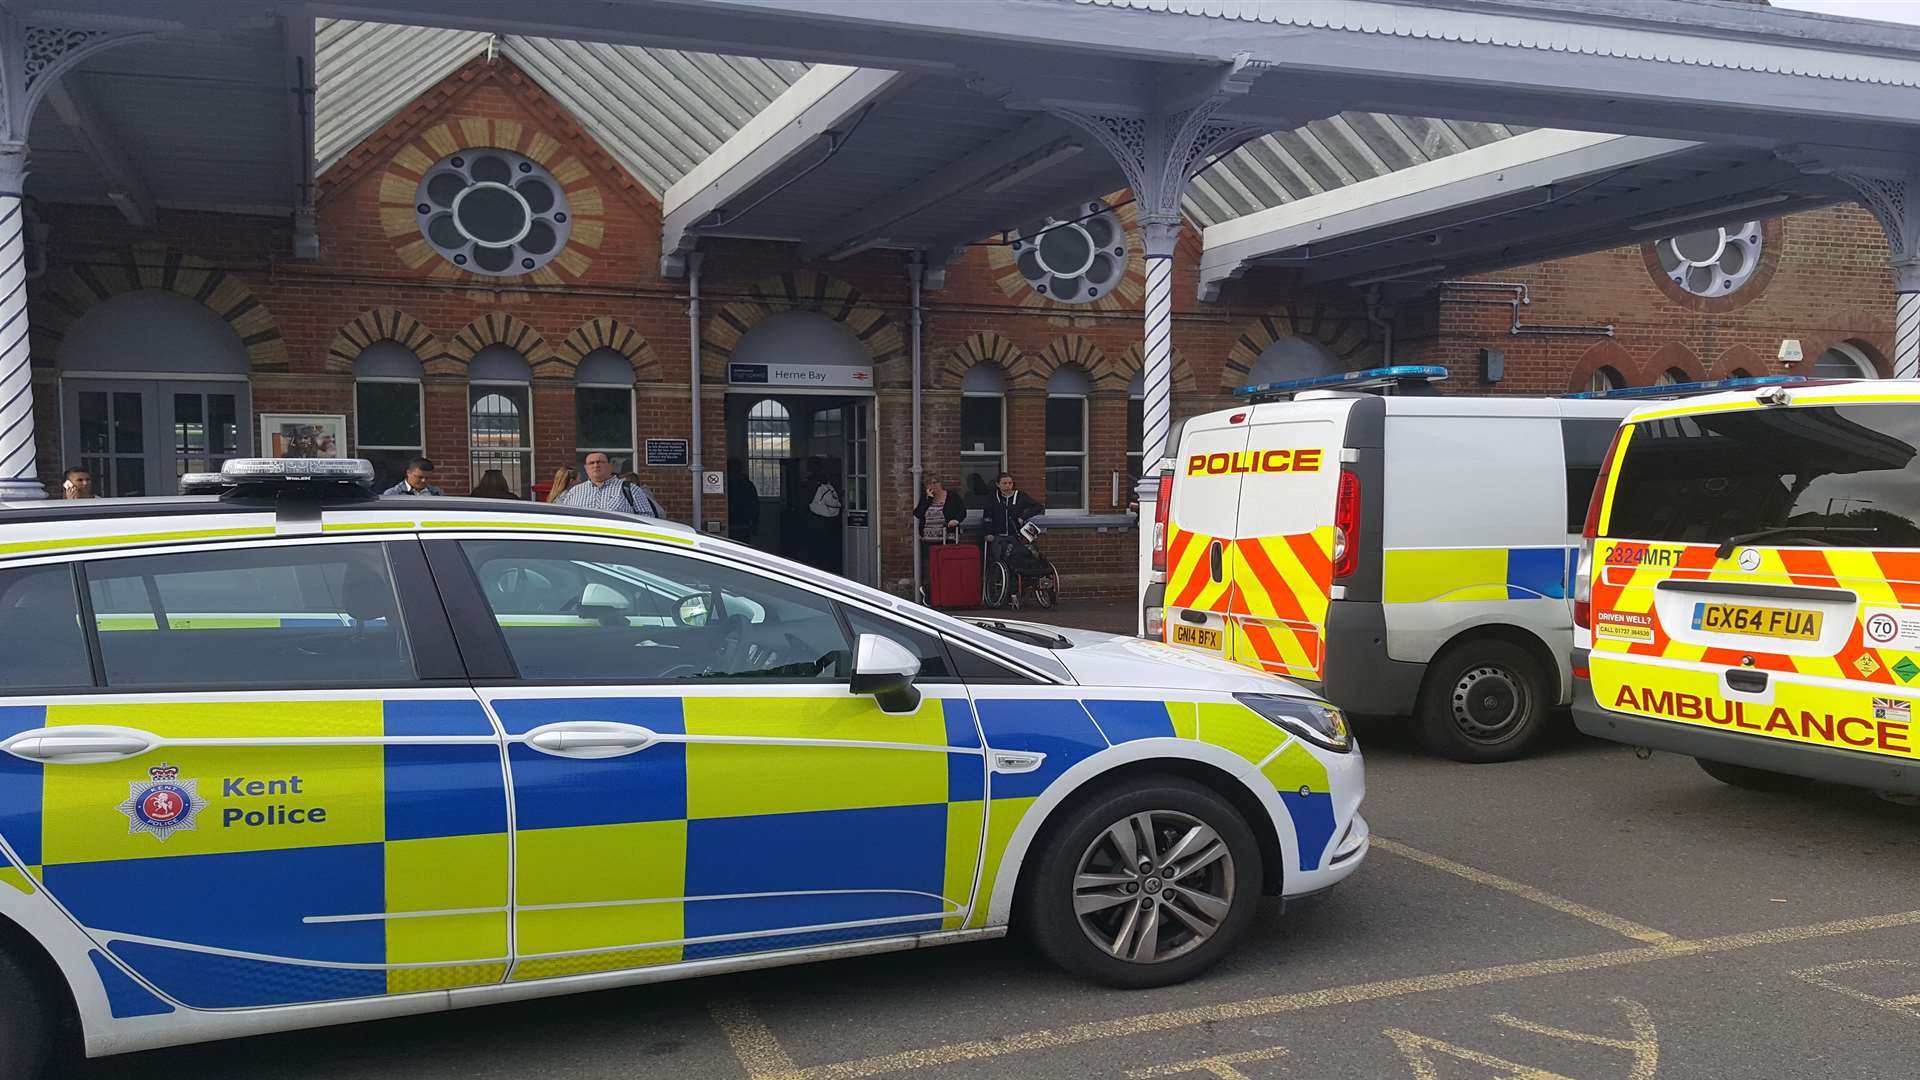 Police were called to the train station just before 7am